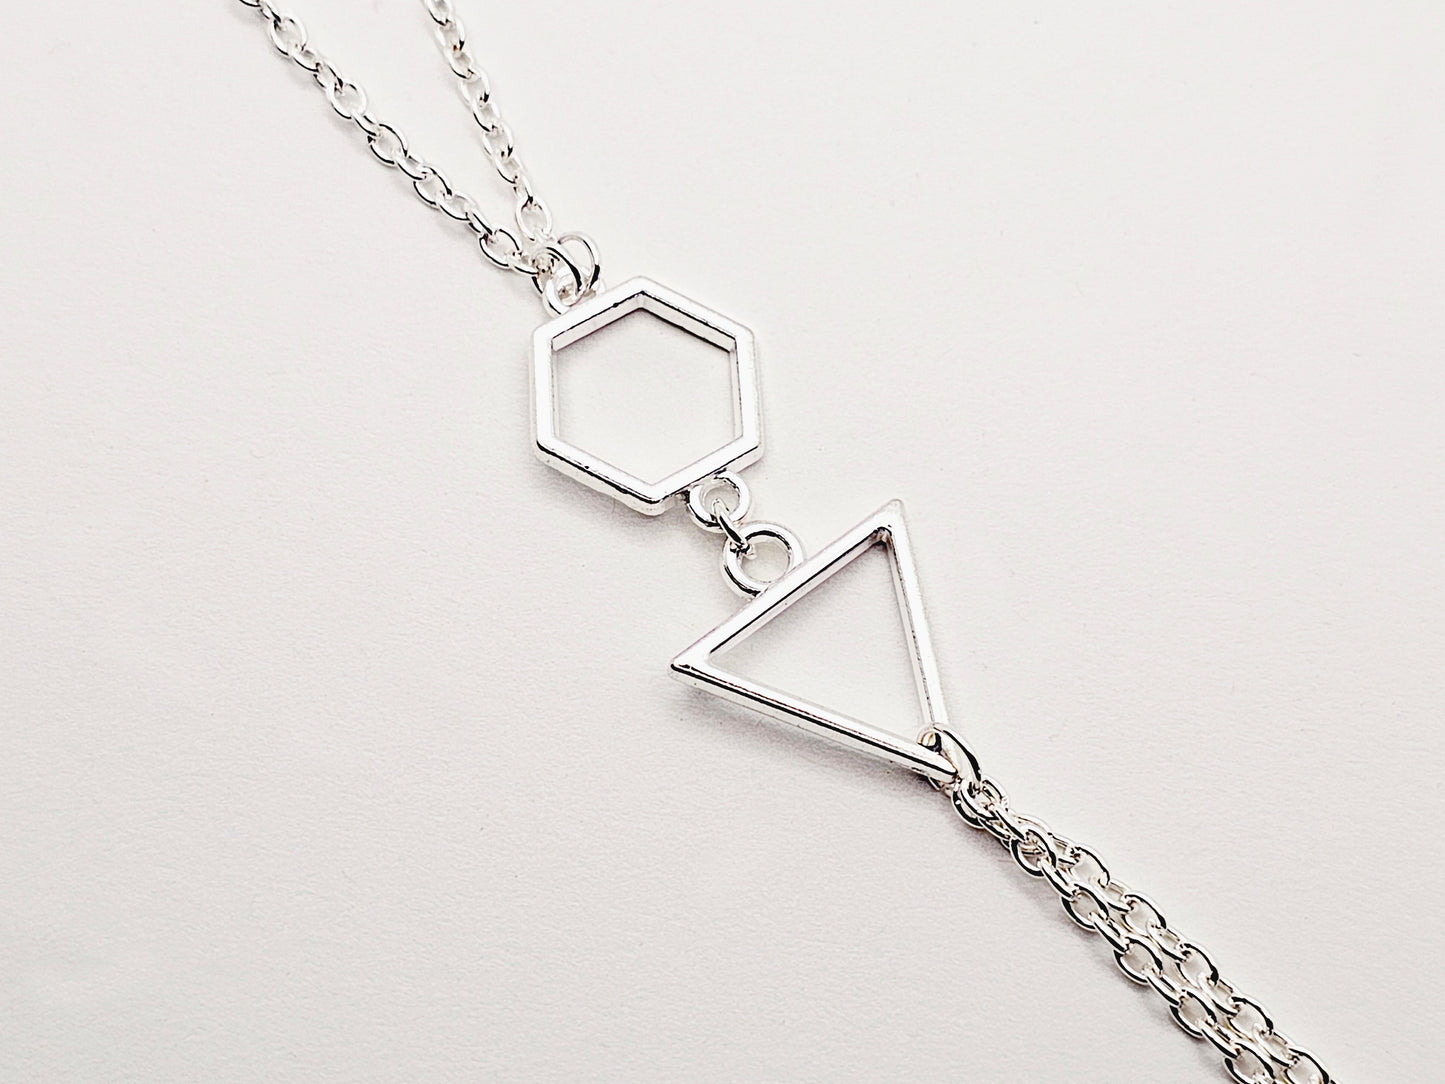 Sexy Geometric Necklace to Nipple Non-Piercing or Use with Pierced or Nipple Clamps